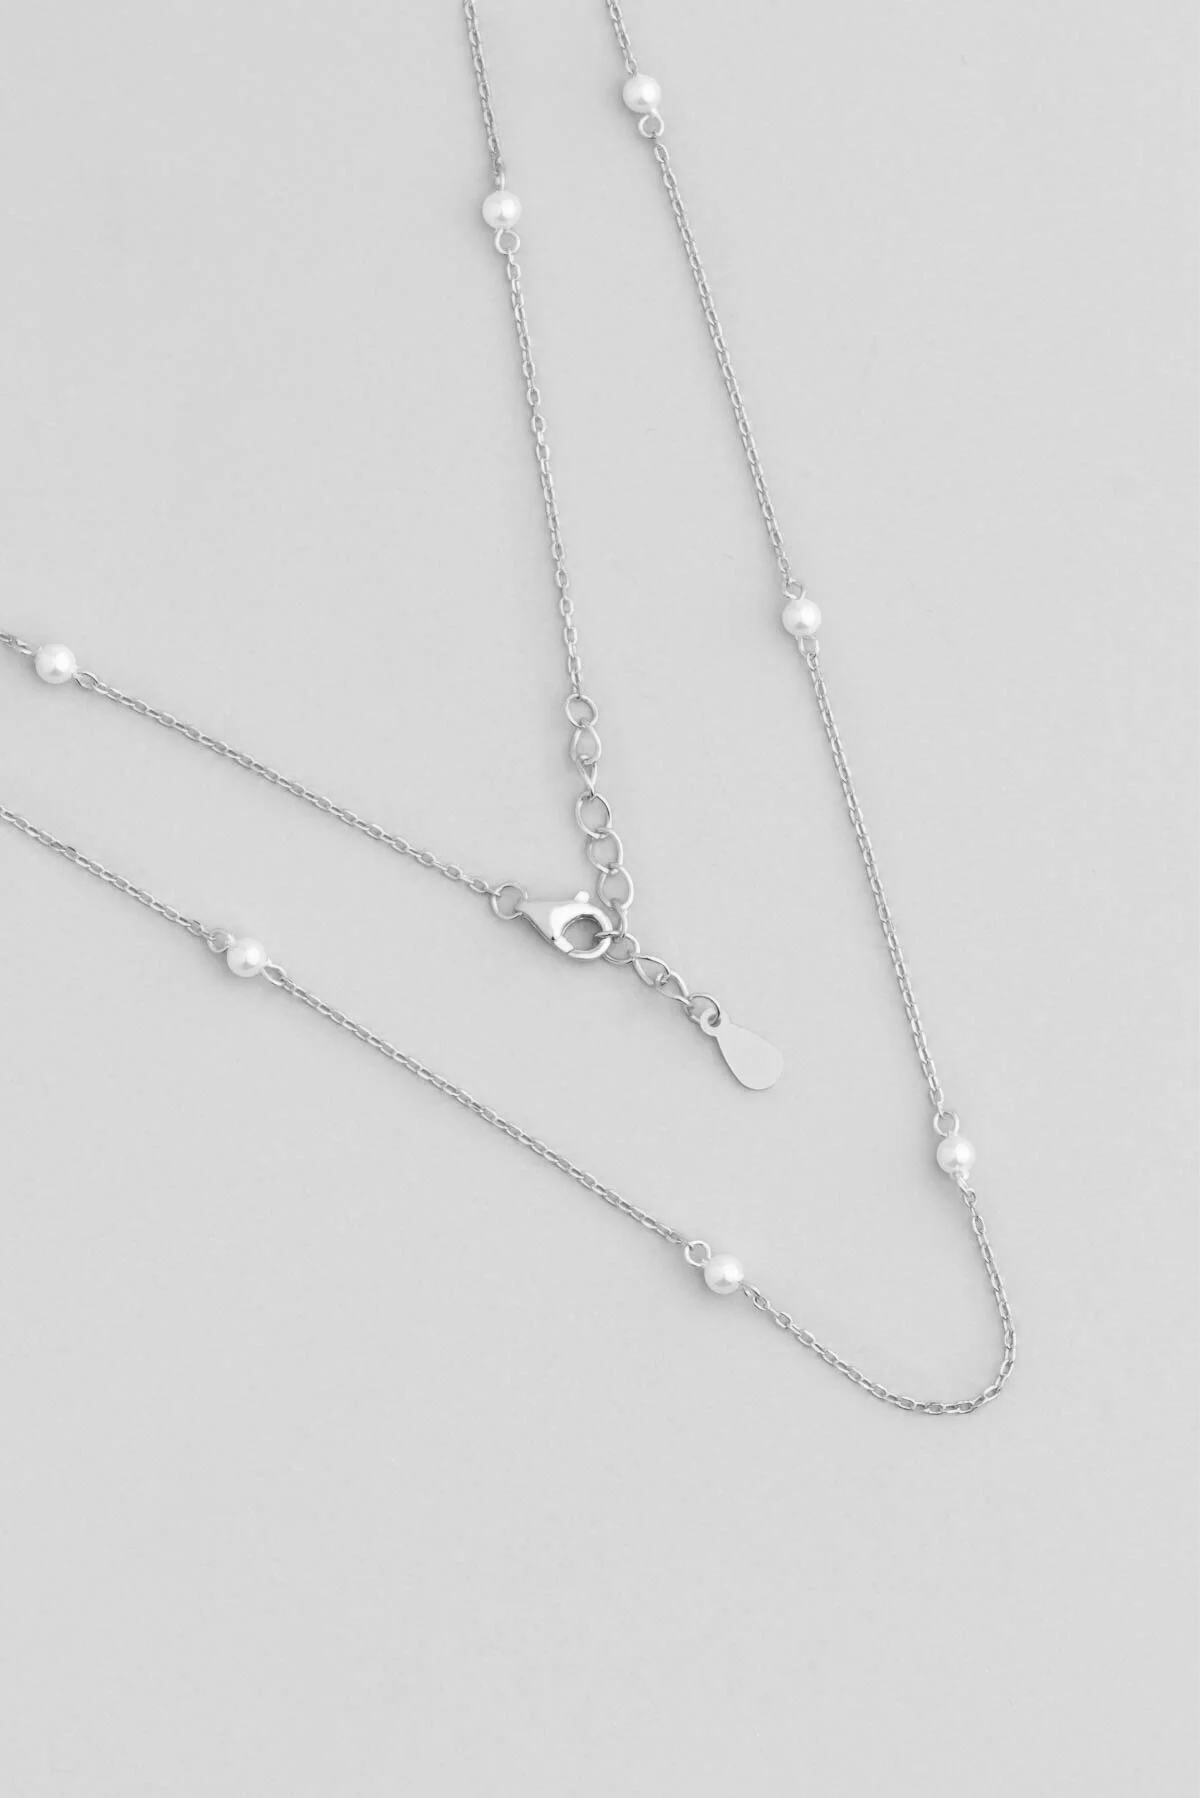 18 Karat White Gold Plated Silver Chain Necklace with Pearl Stone